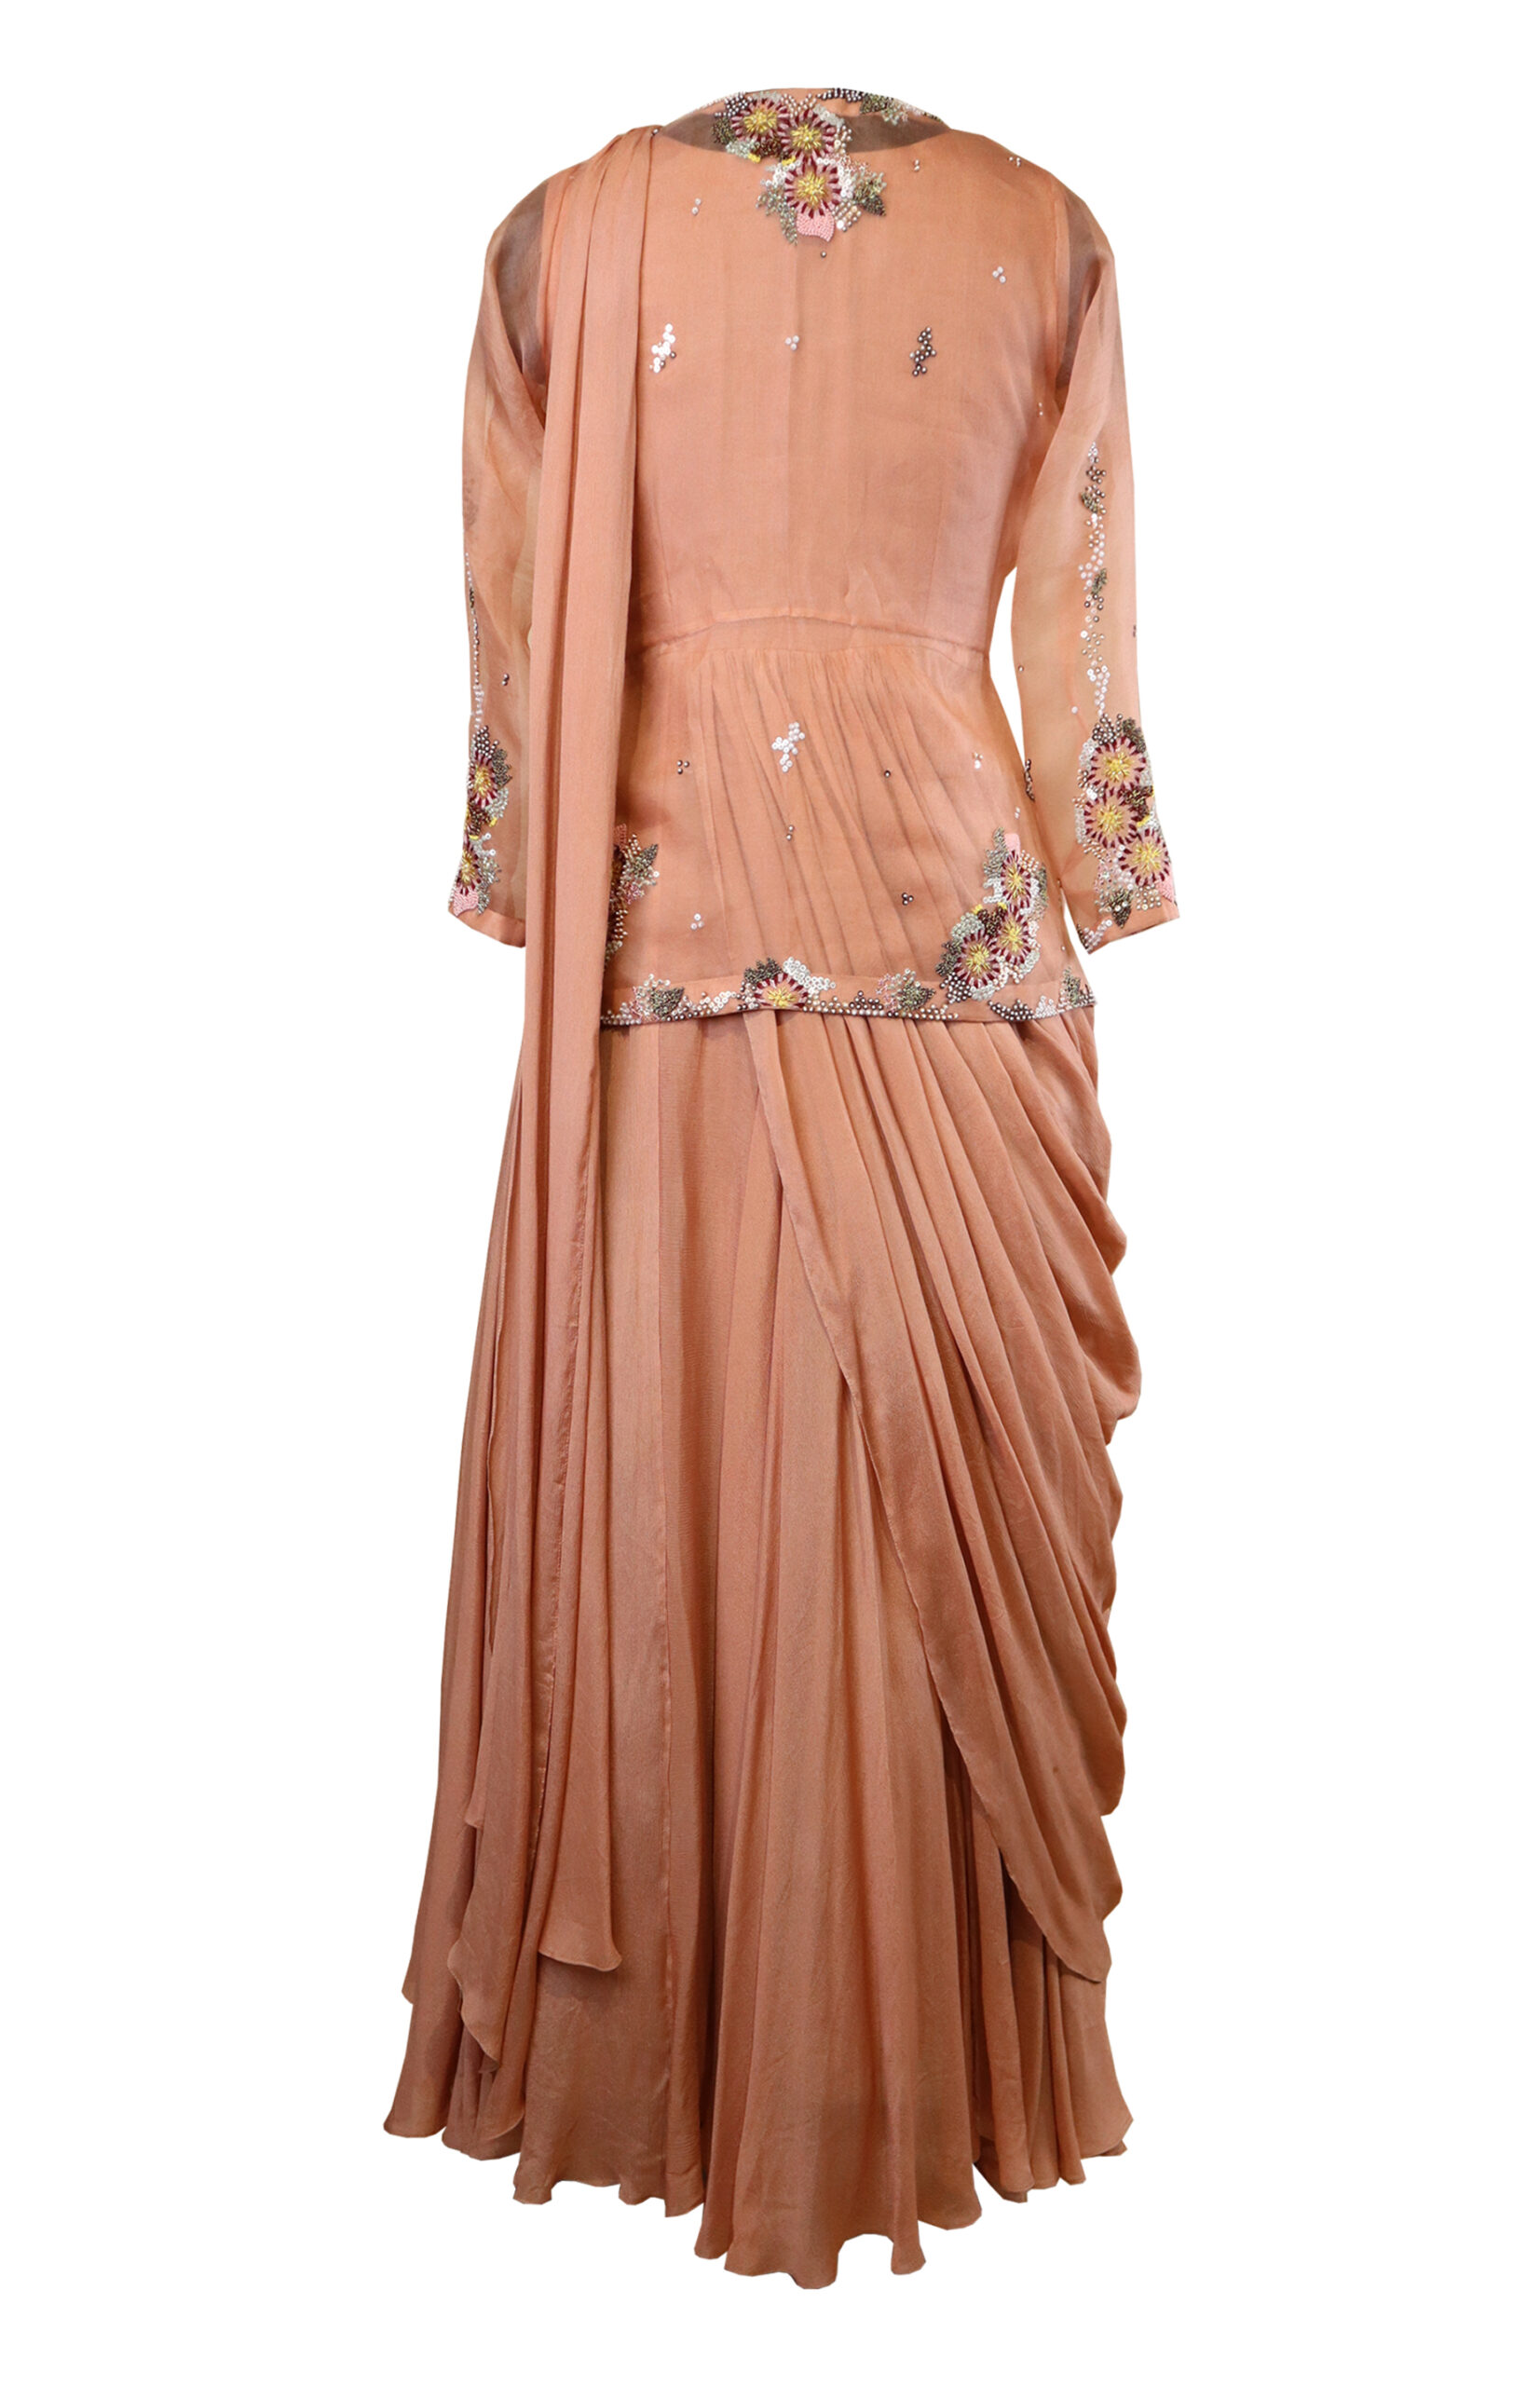 Buy Yoni Steam Gown, Full Body Bath Robe Yoni Steaming s Gown, Home  Fumigation Bathrobe Cloak for Detoxification Postpartum Sweat Steaming  Women Vaginal Steaming Robes Online at desertcartINDIA